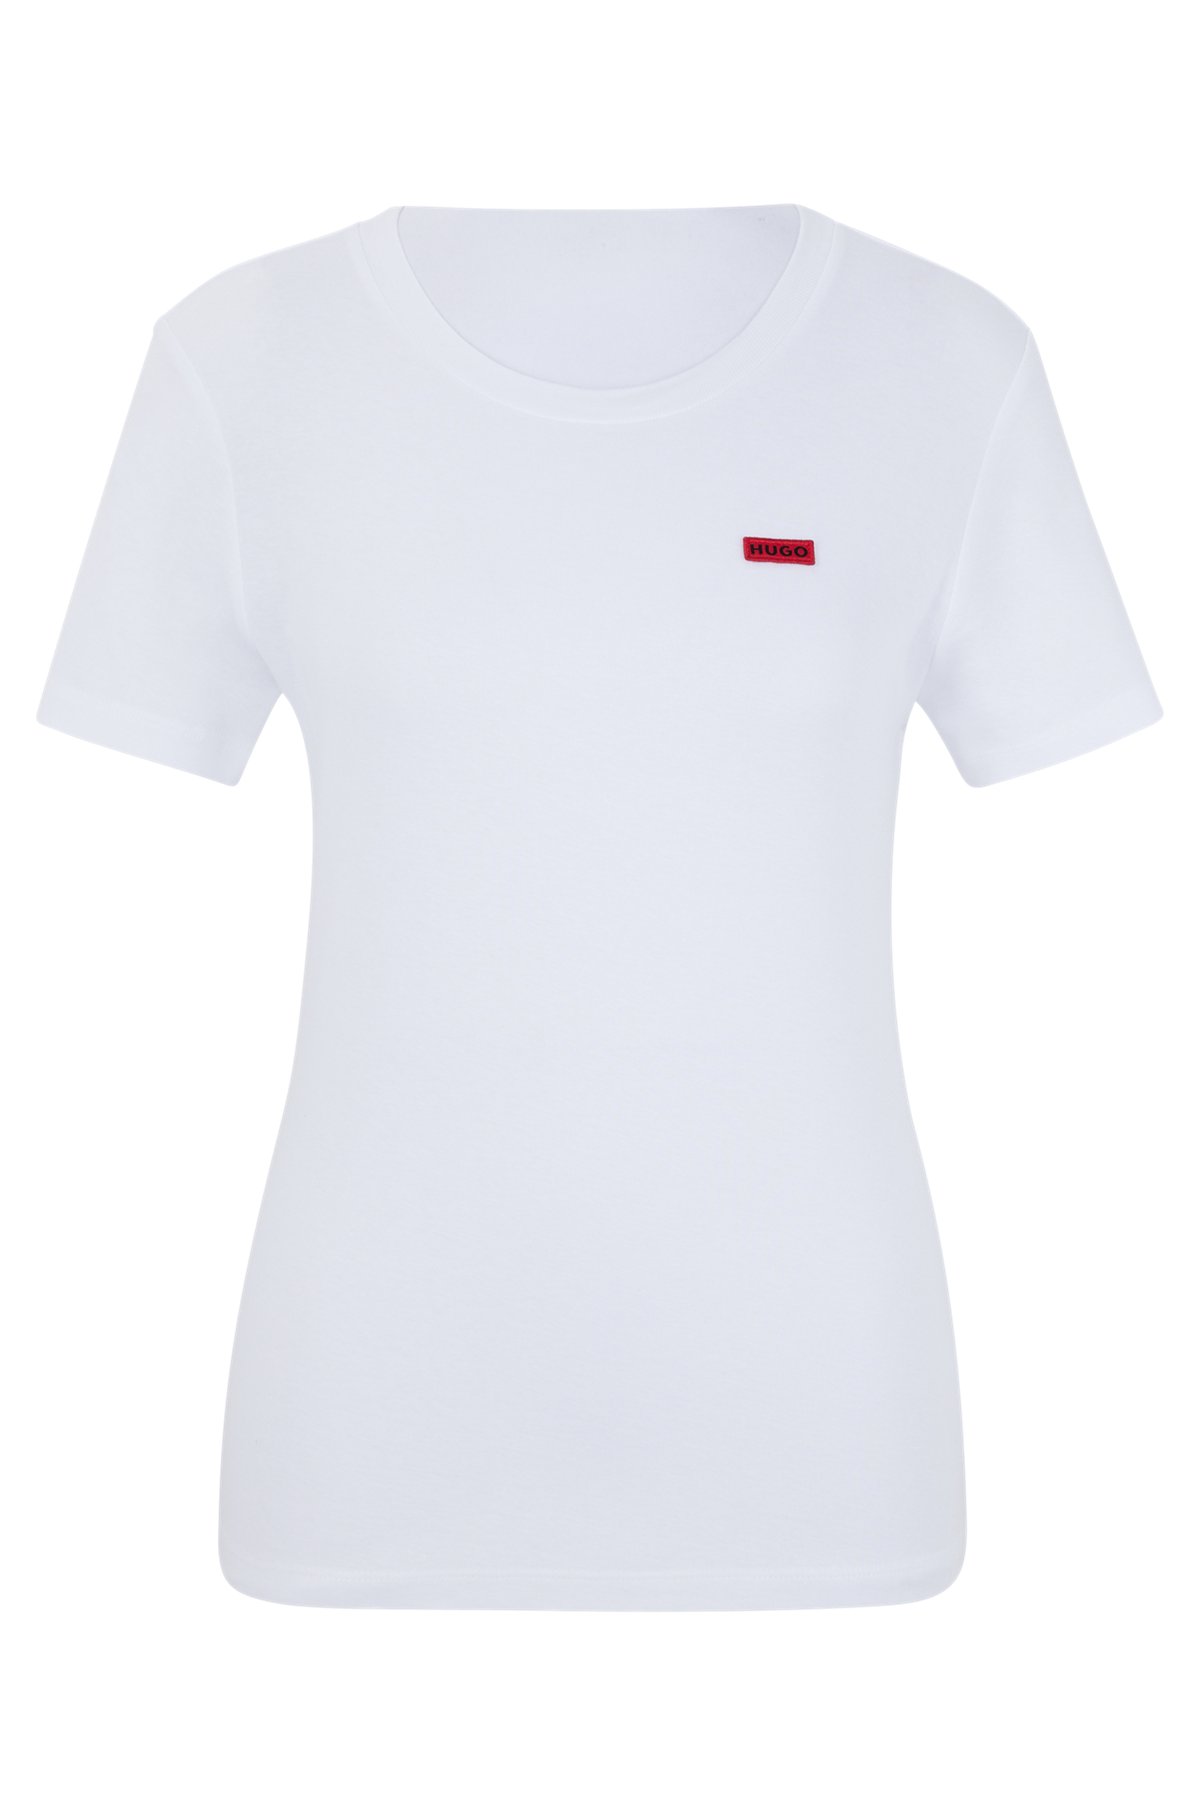 Crew-neck T-shirt in pure cotton with logo detail, White